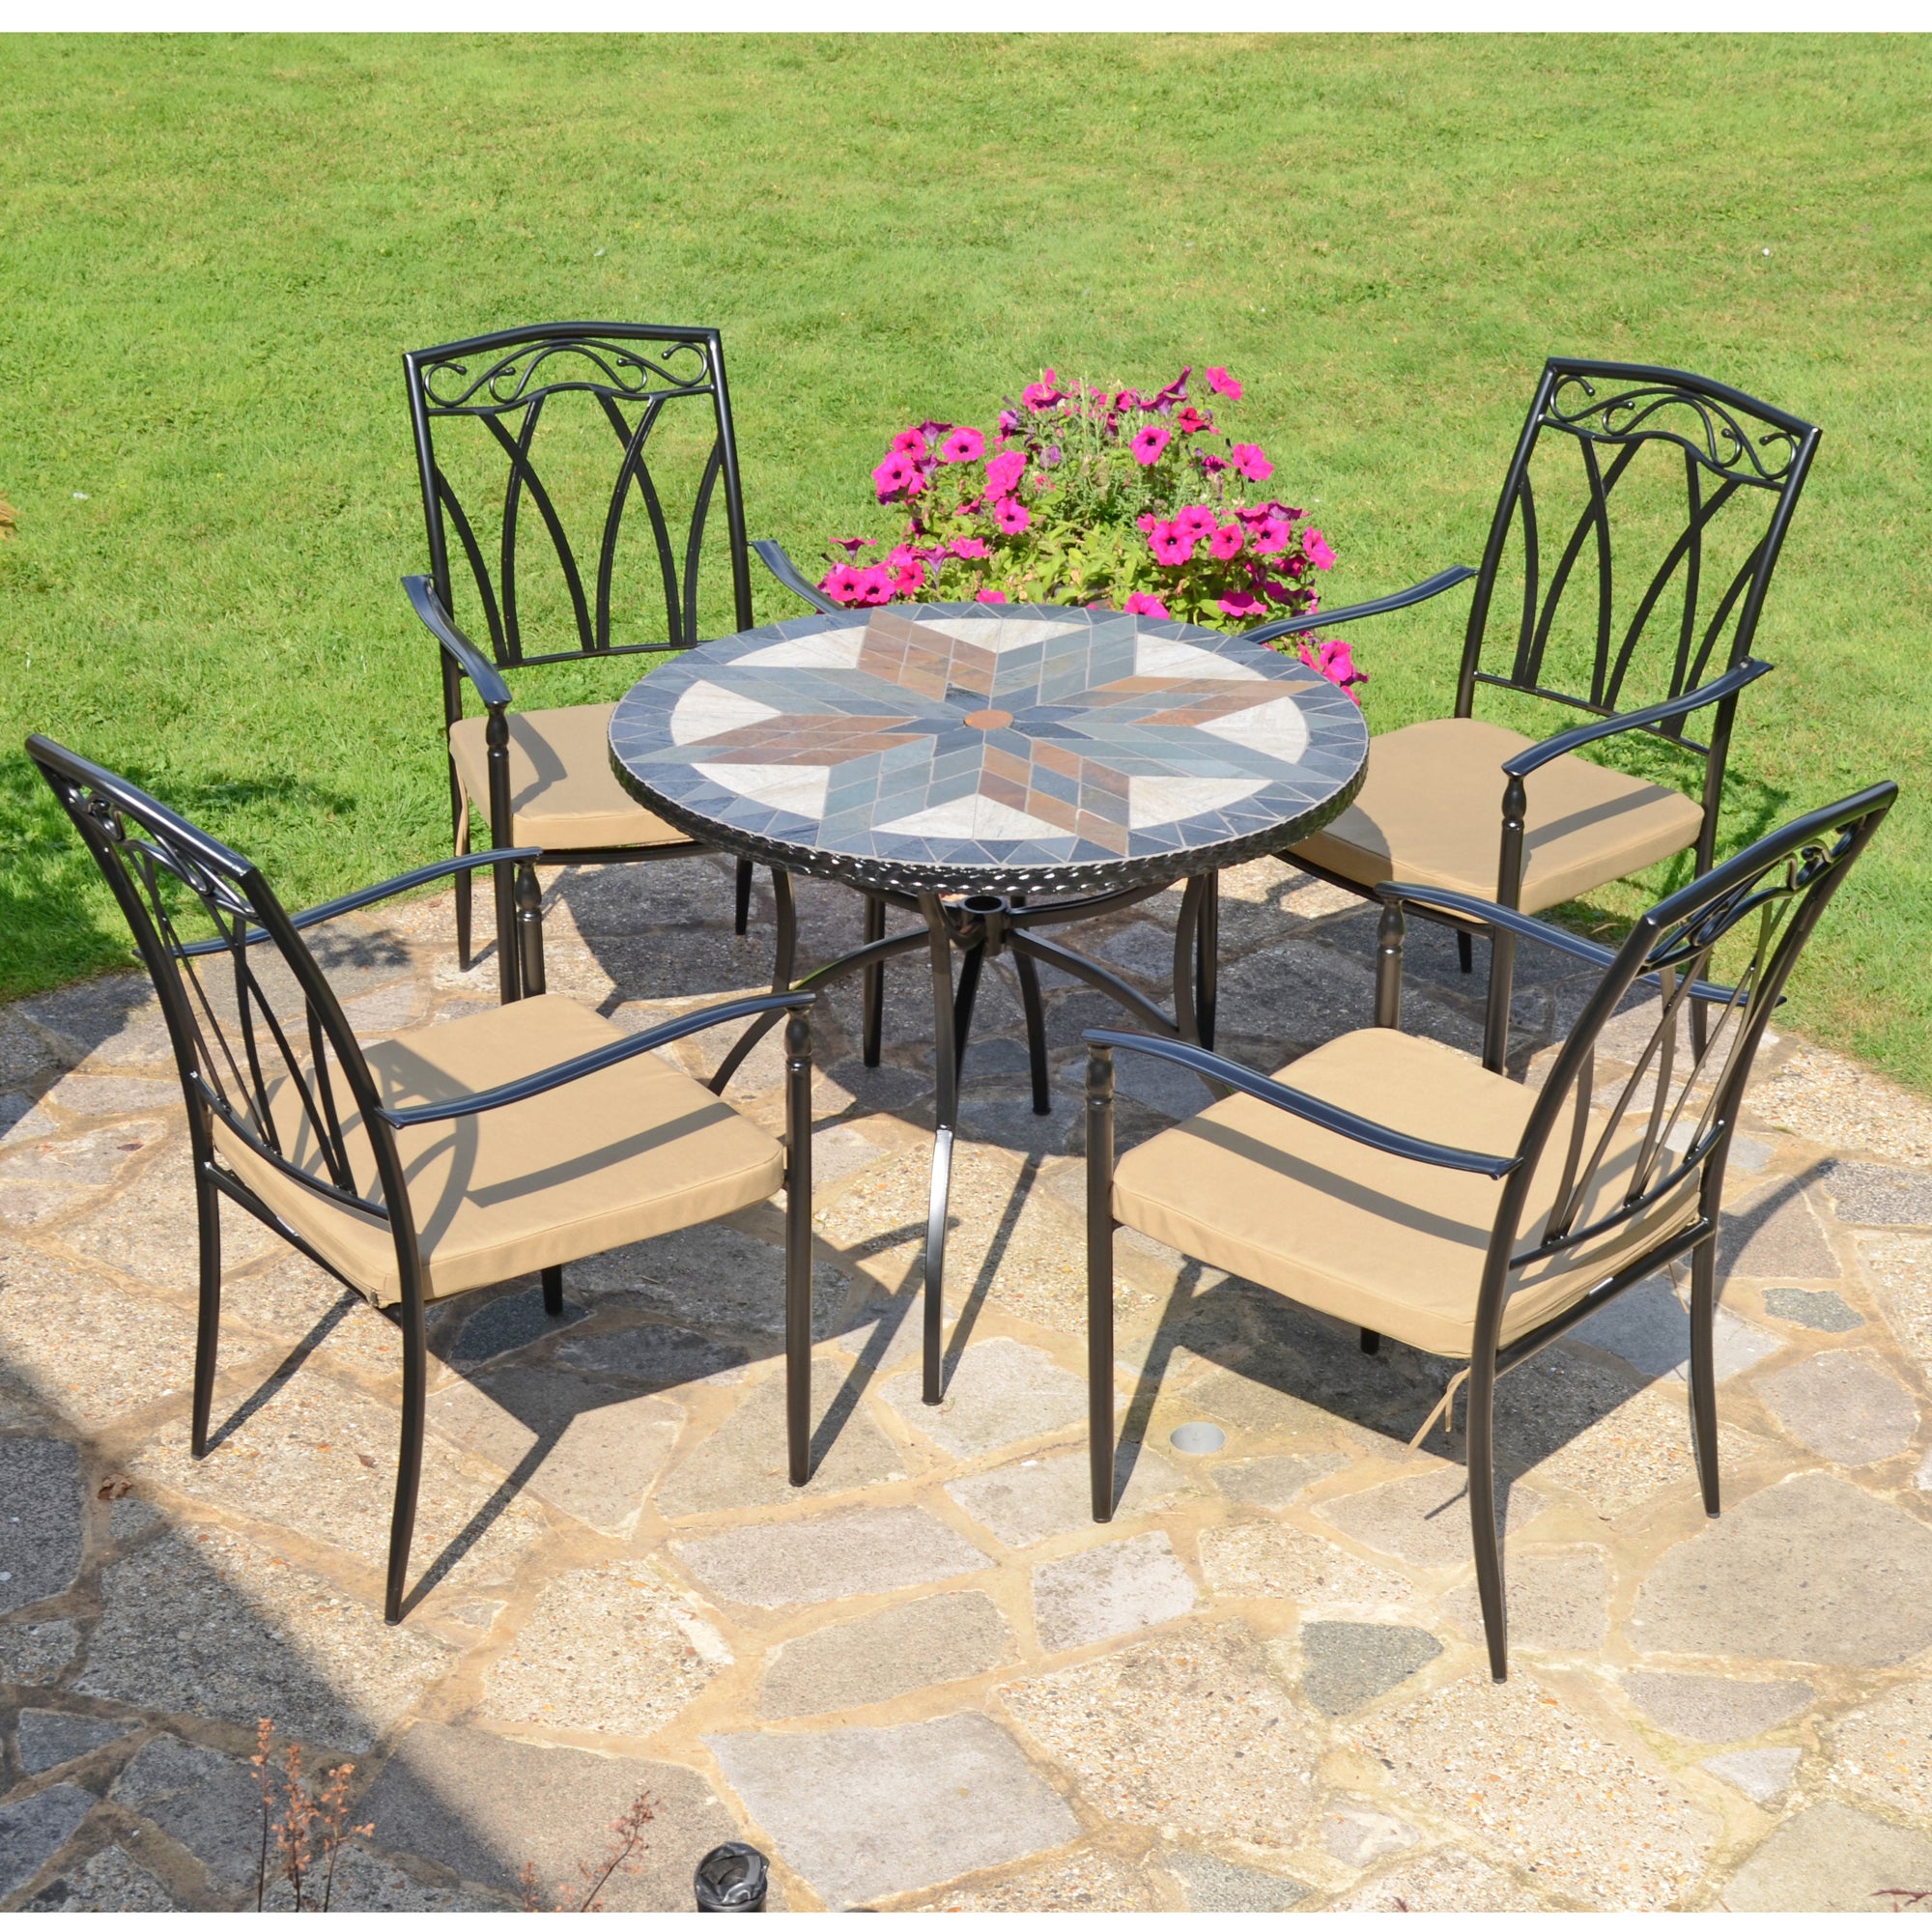 Memphis 91cm Patio Table with 4 Austin Chairs Set Green